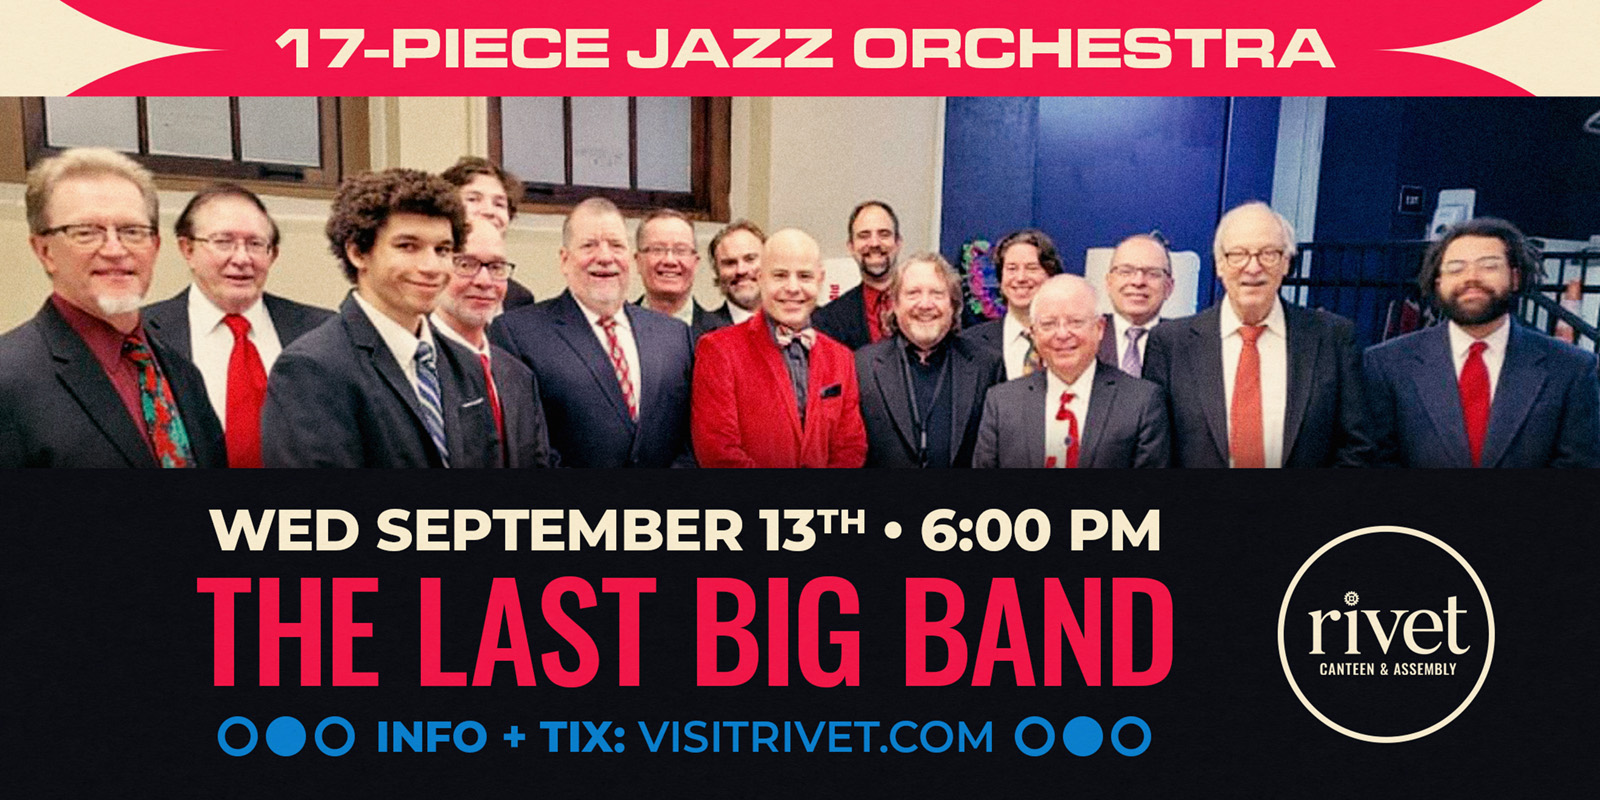 The Last Big Band will ber performing live at Rivet: Canteen & Assembly on Wednesday, September 13th, 2023. Get your tickets now!